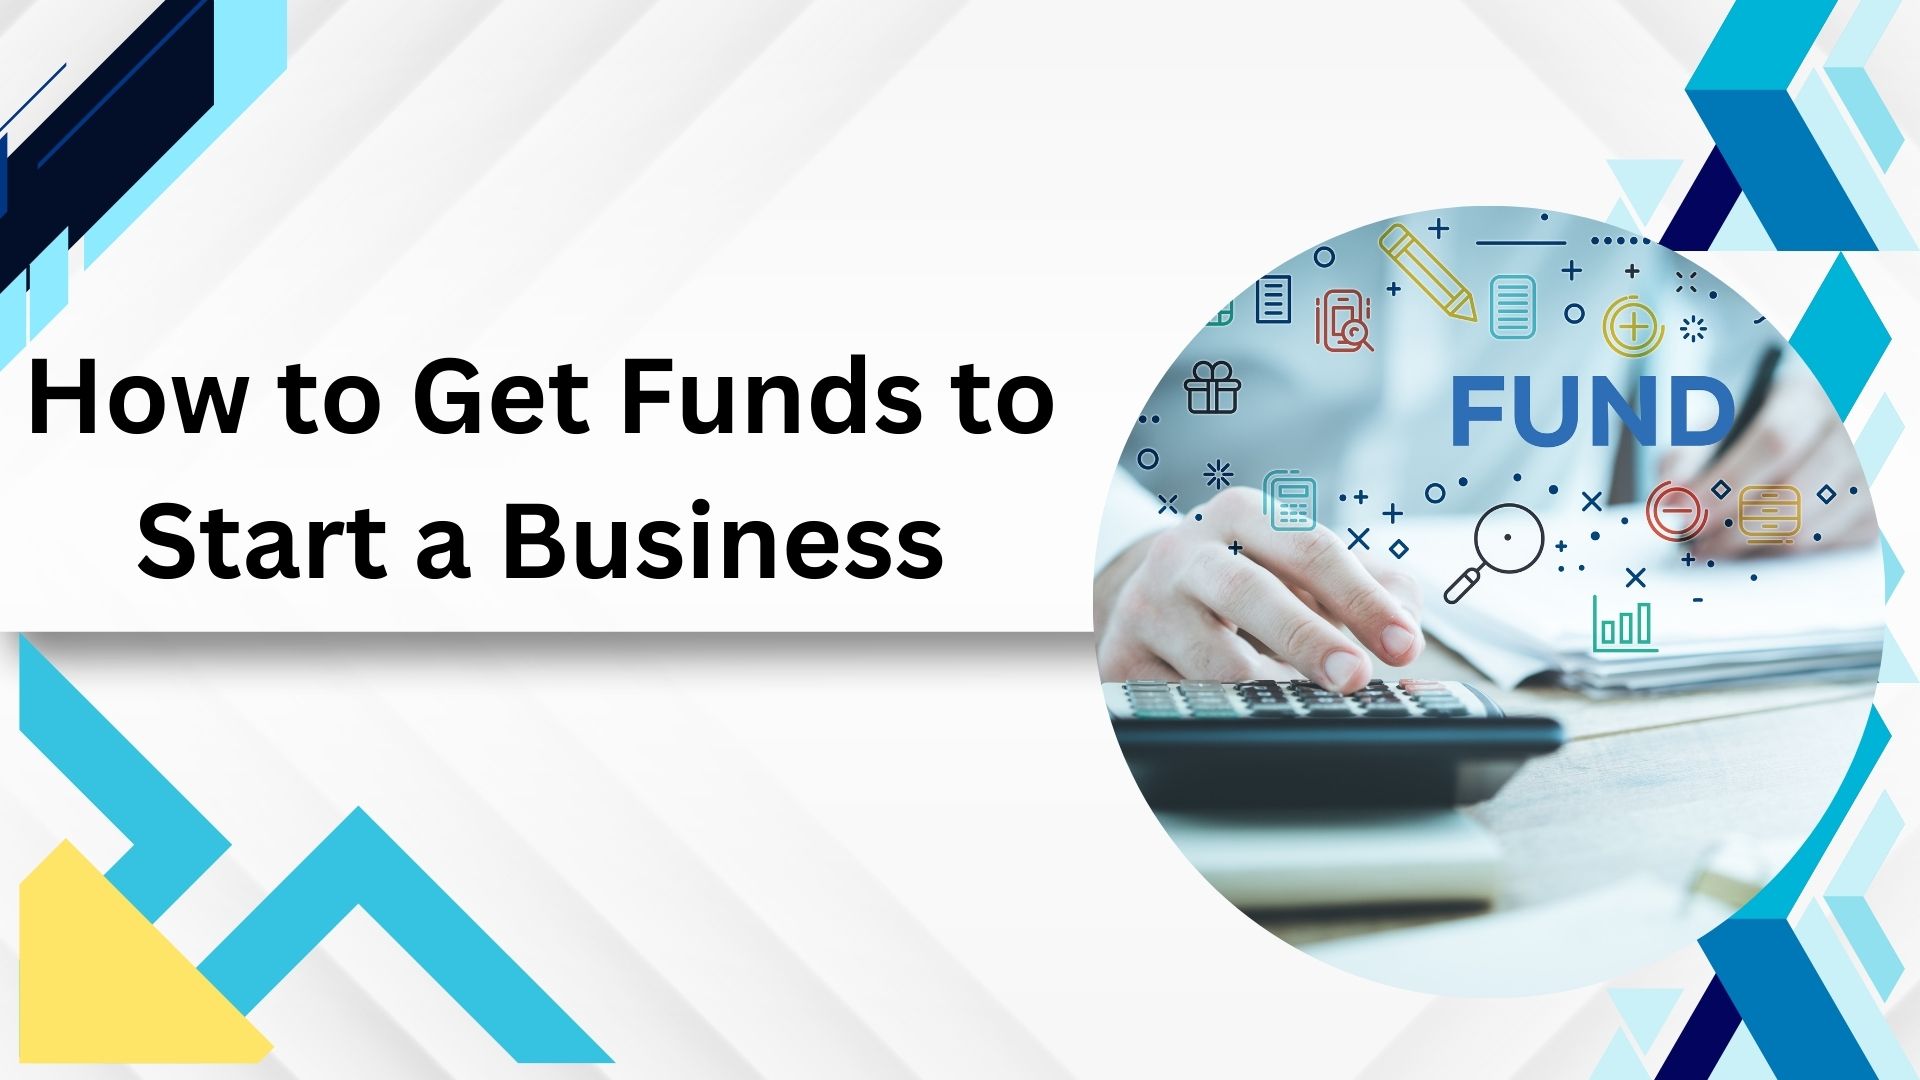 How to Get Funds to Start a Business